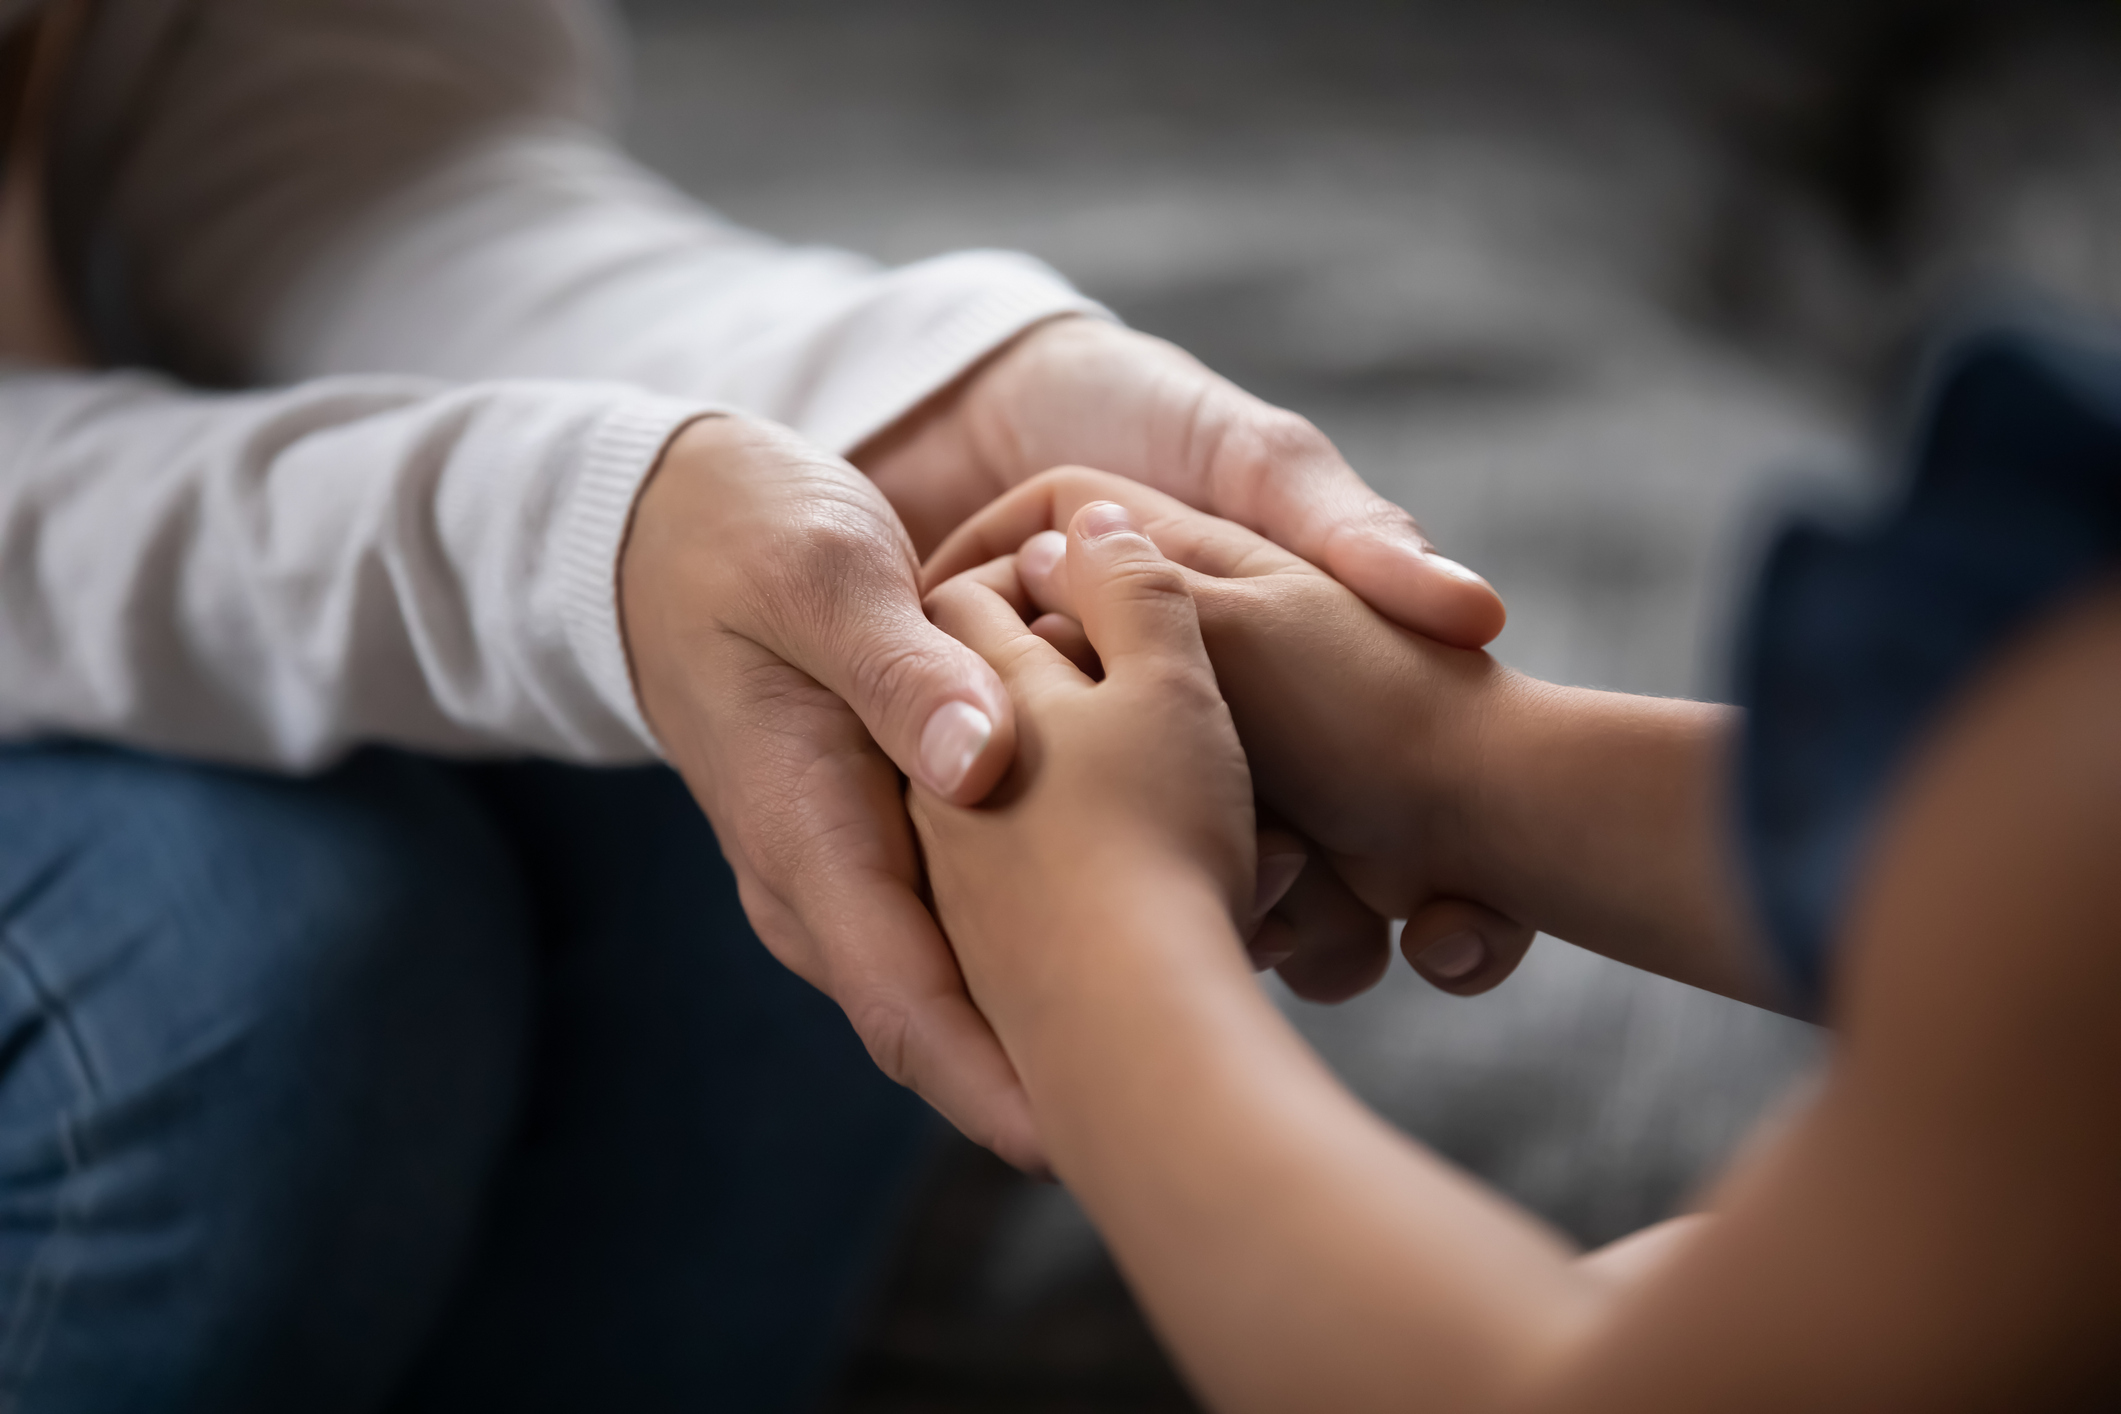 Two sets of hands; an adult holding a child's hands in both of their own.